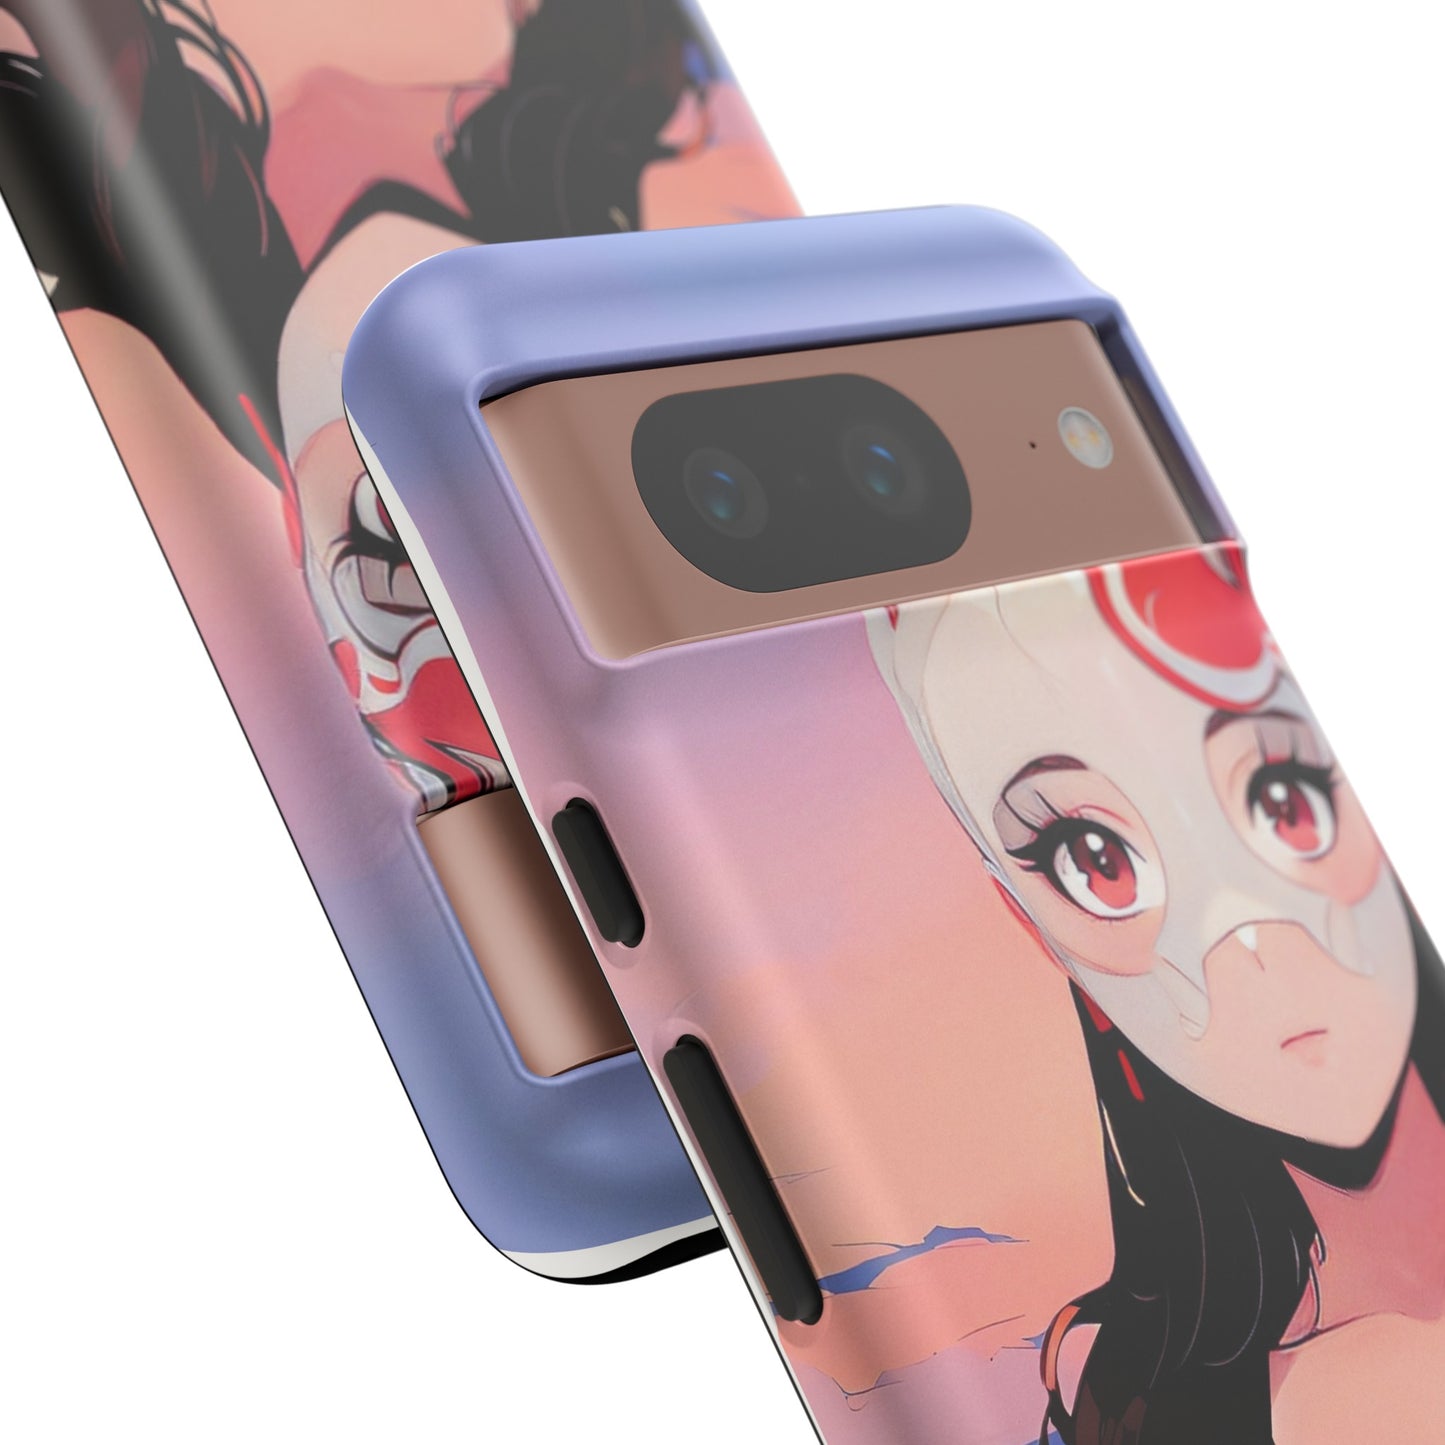 Anime Style Art Tough Cases- "Busty Sunset"